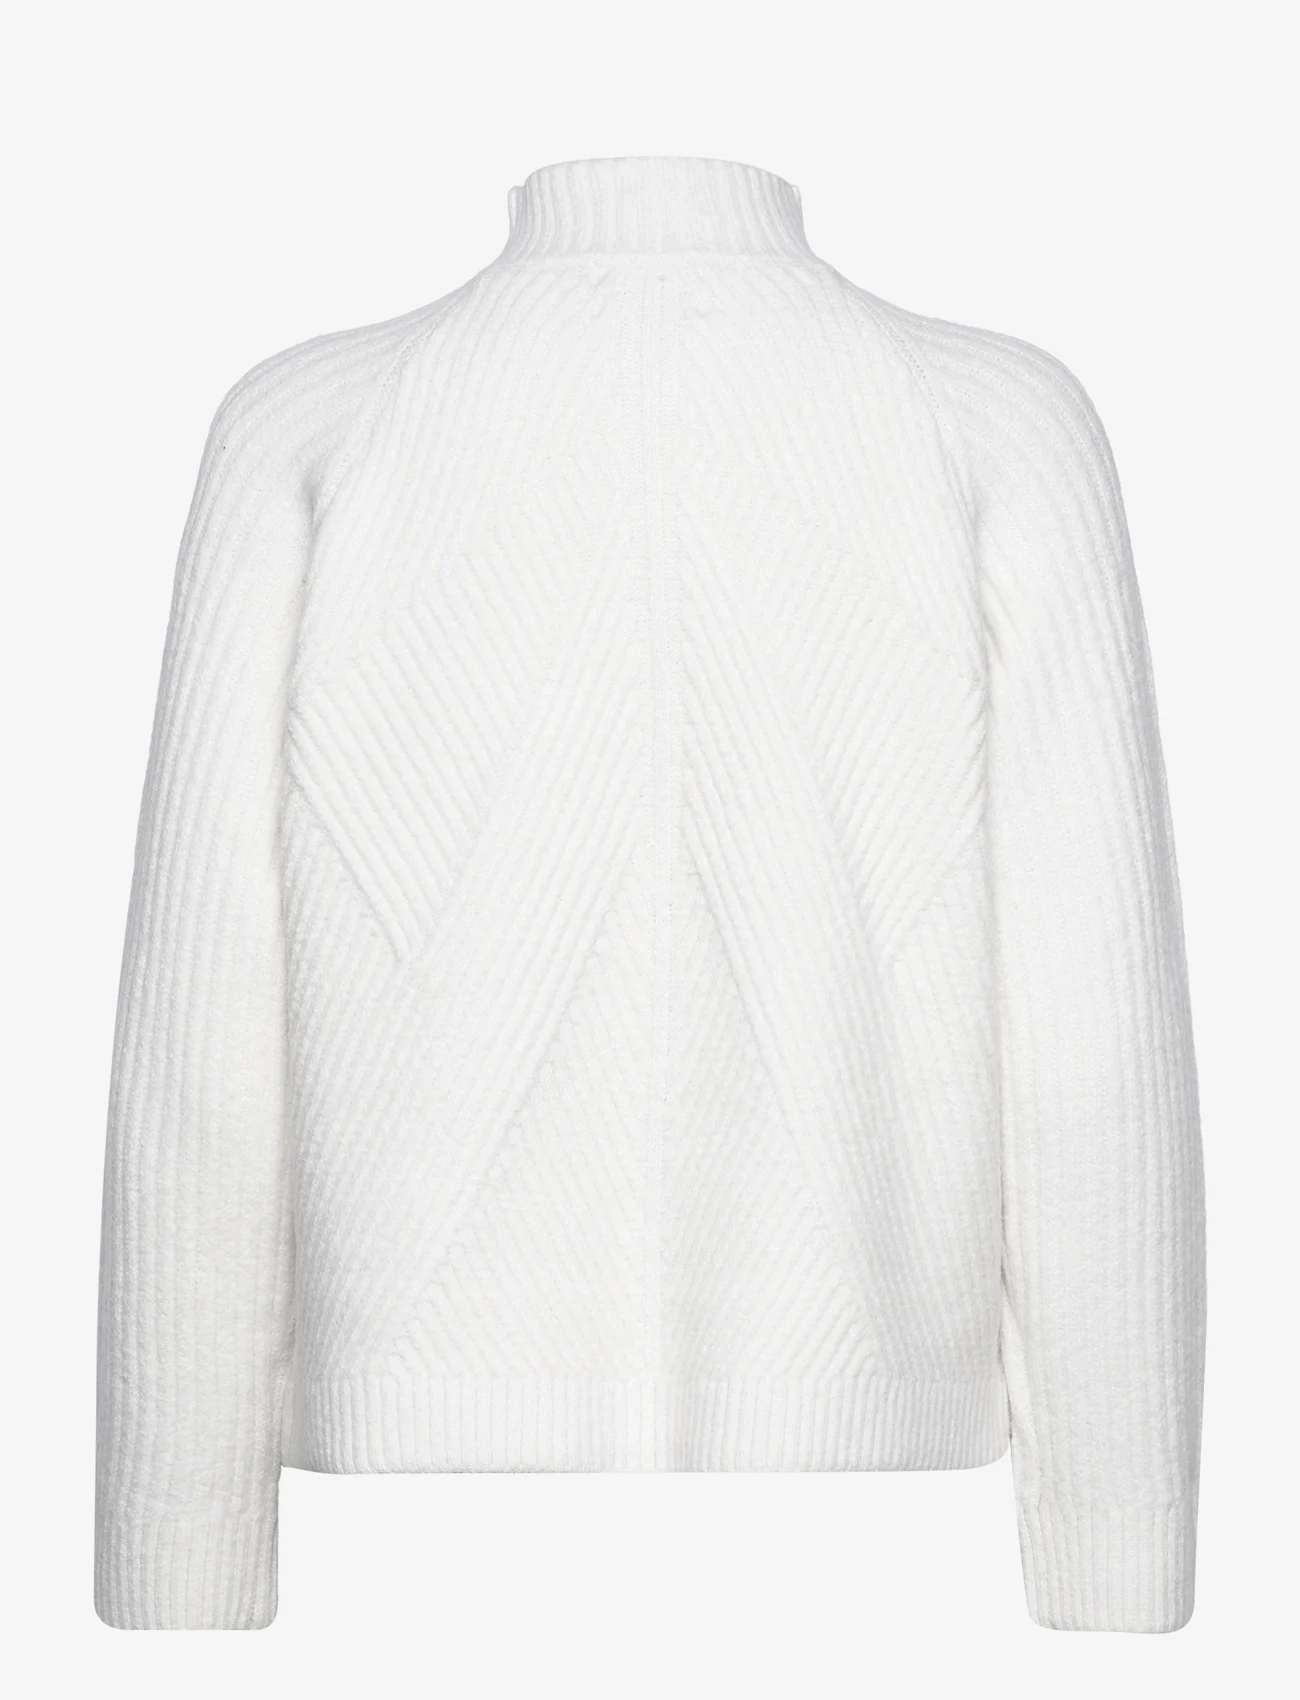 Sofie Schnoor - Sweater - jumpers - off white - 1